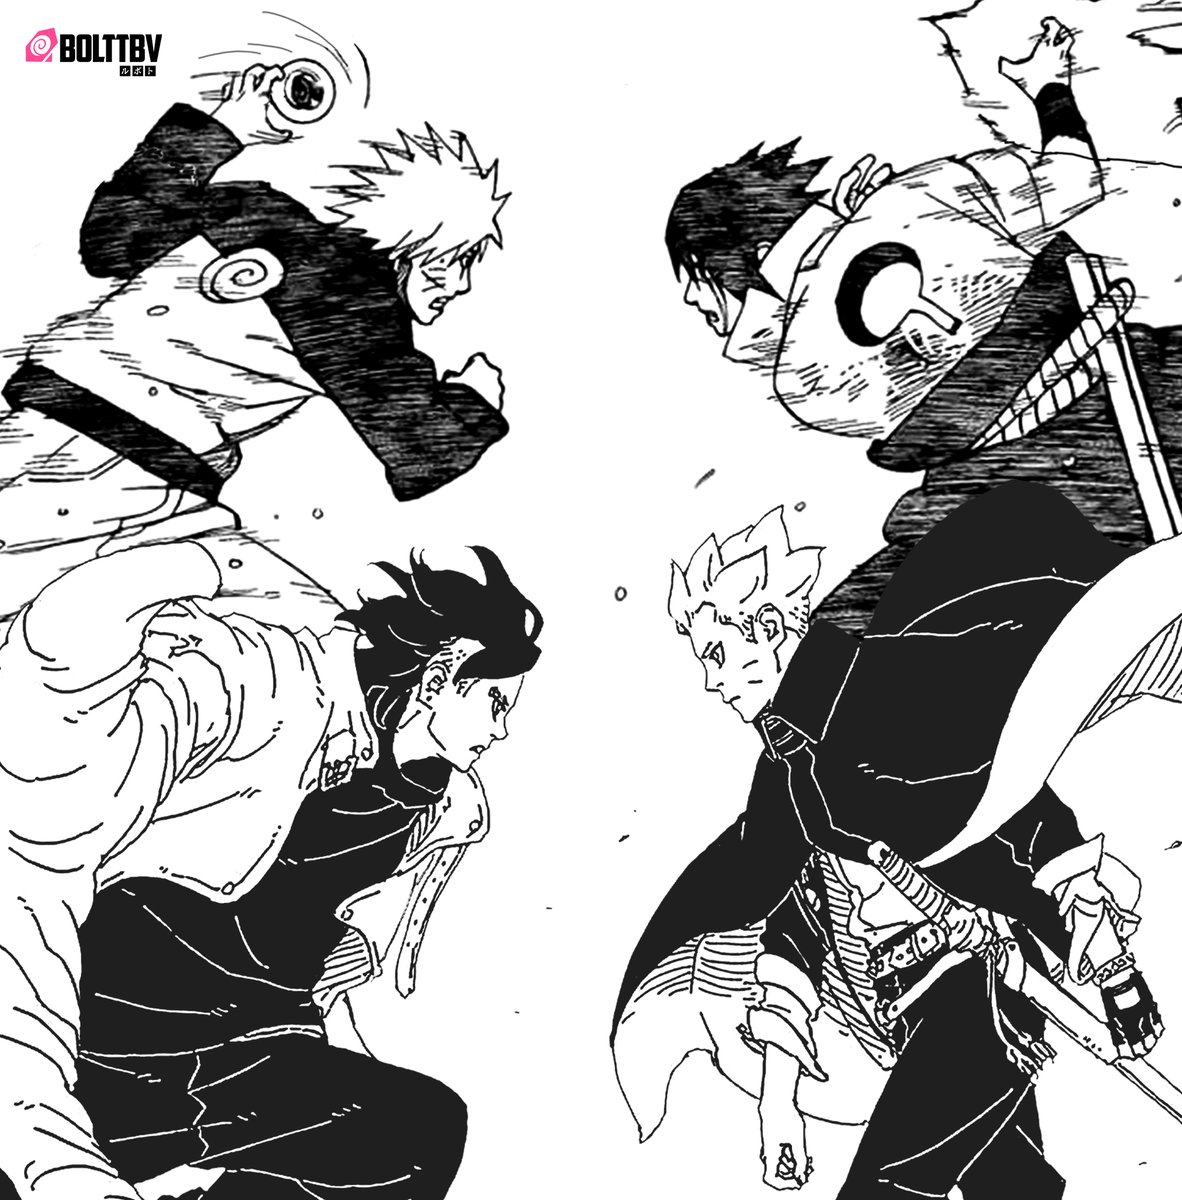 #BORUTO #NARUTO 

THEIR FINAL BATTLE WILL BE A TRUE SPECTACLE 🔥